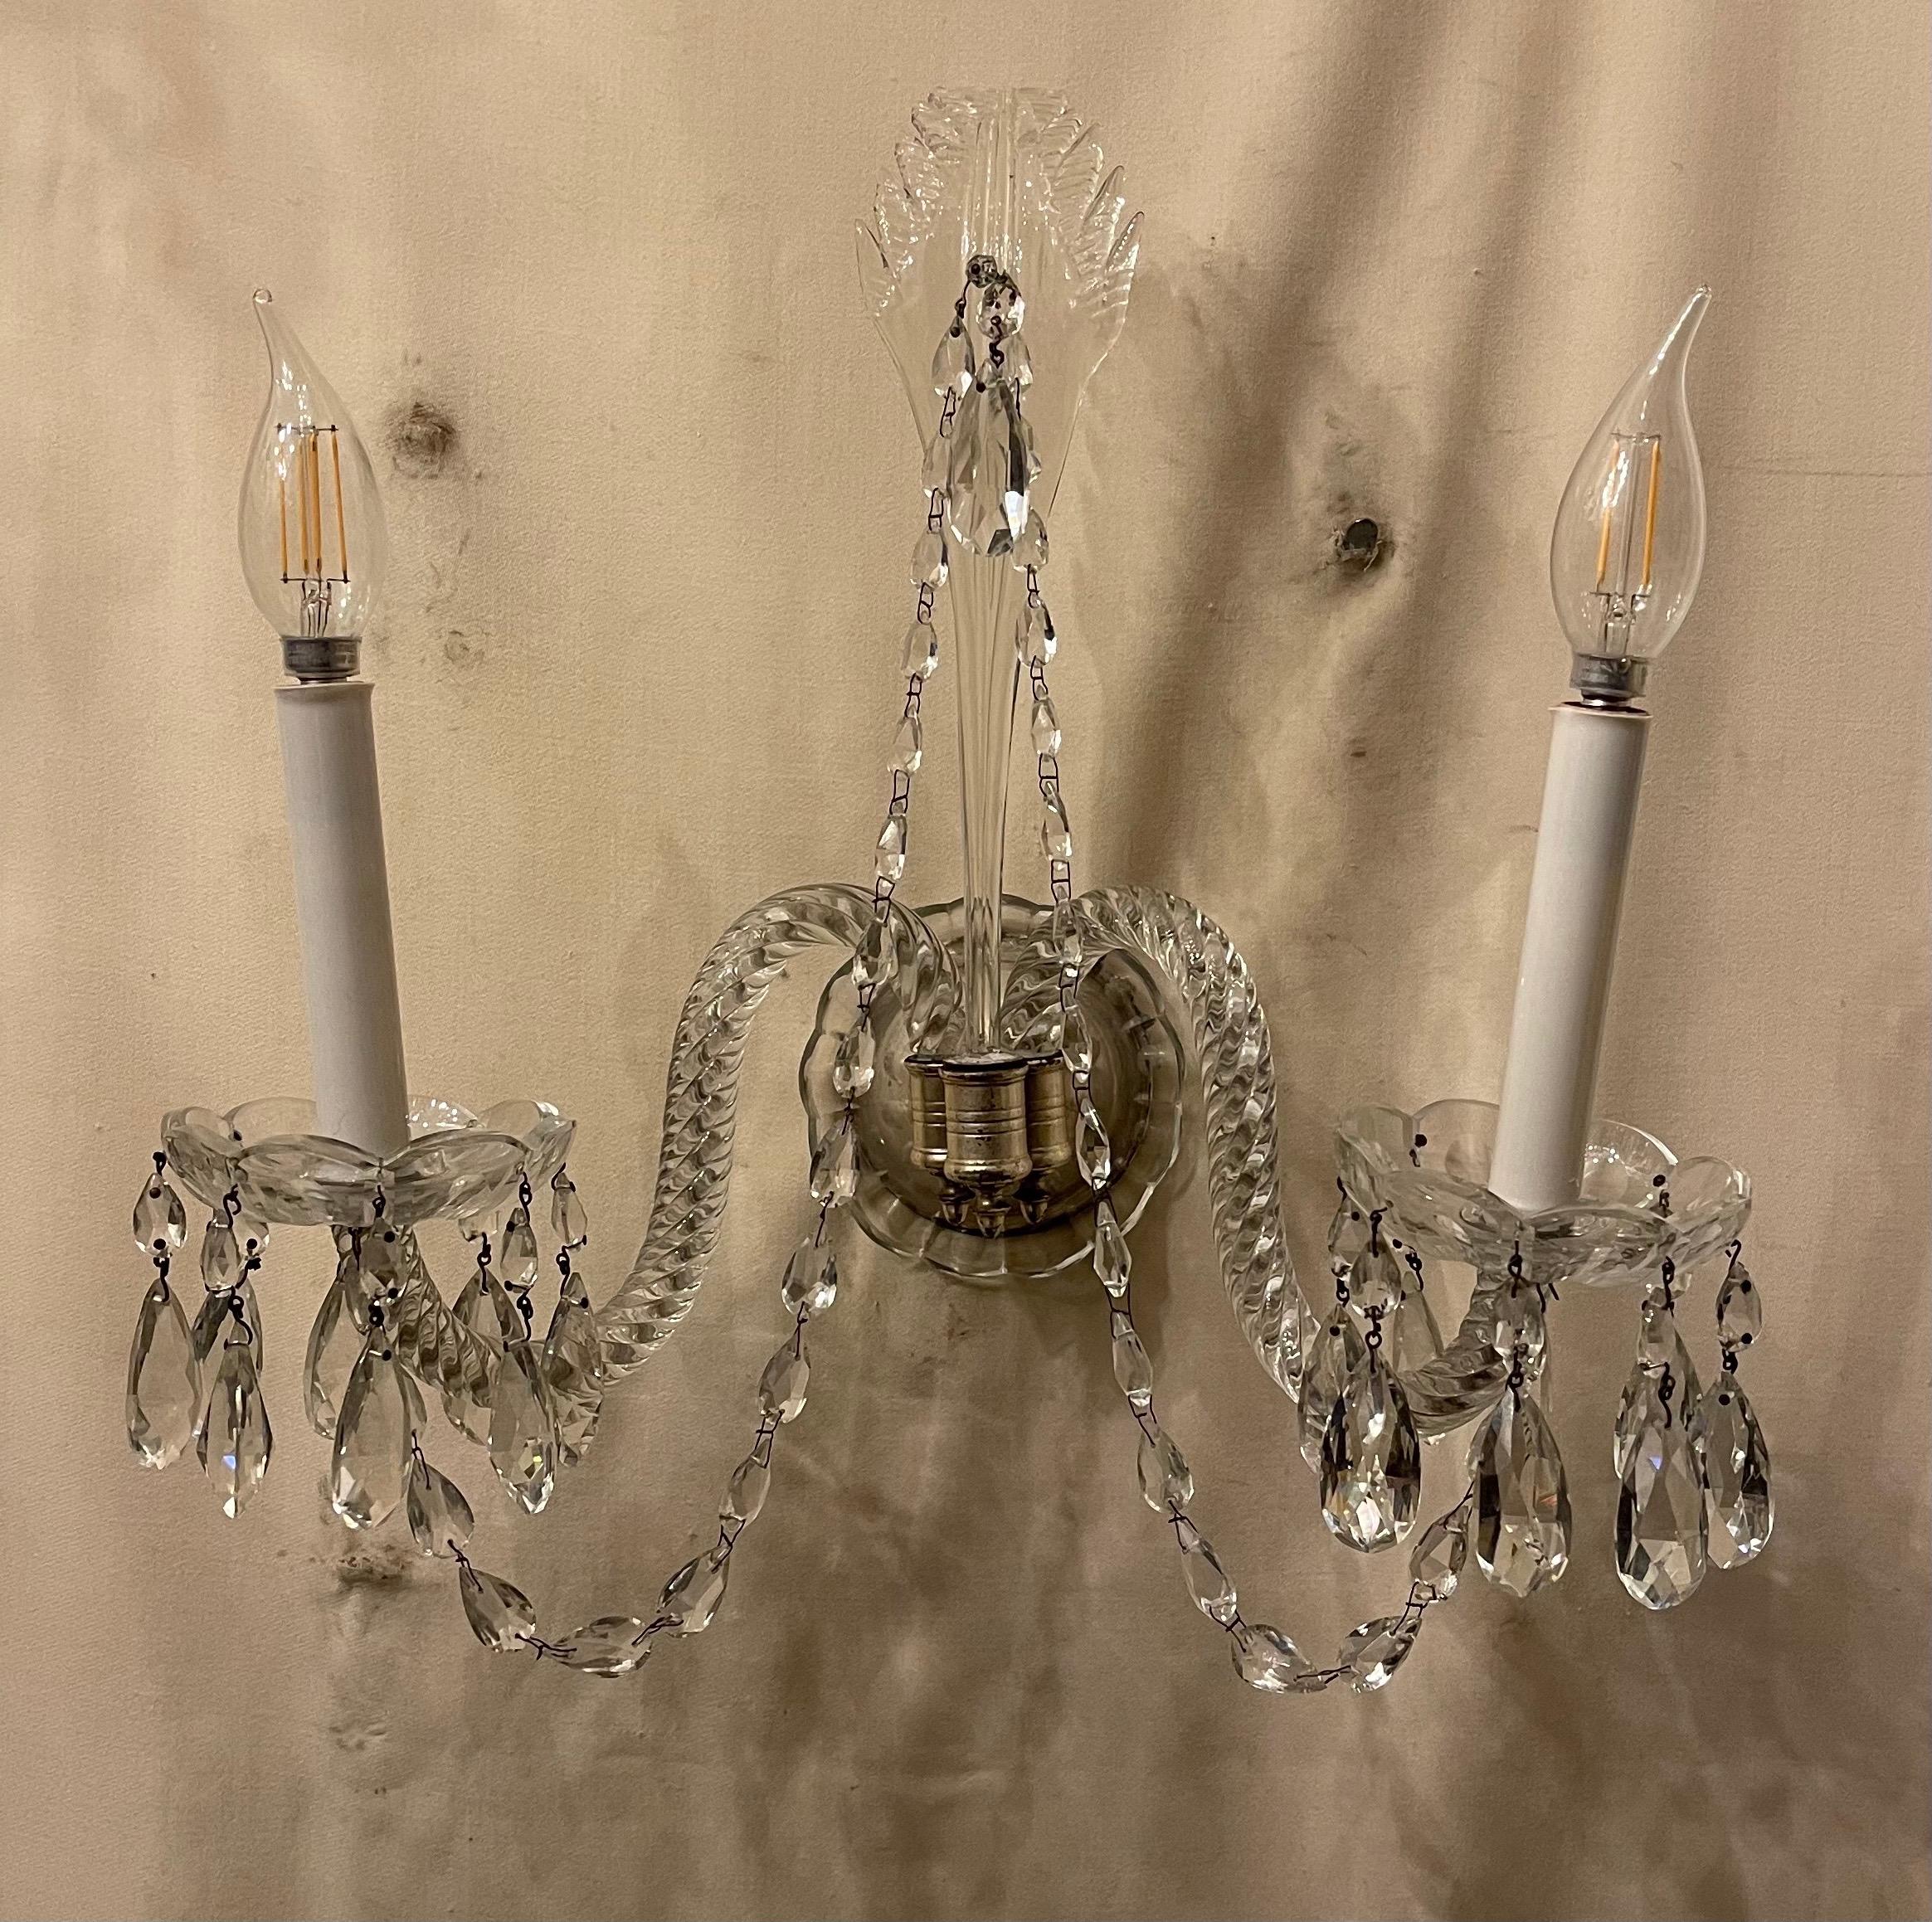 A wonderful pair of antique cut crystal Georgian style silvered bronze two light sconces with center palm leave cascading over crystal swags, the sconces are rewired and come with mounting brackets ready to install.